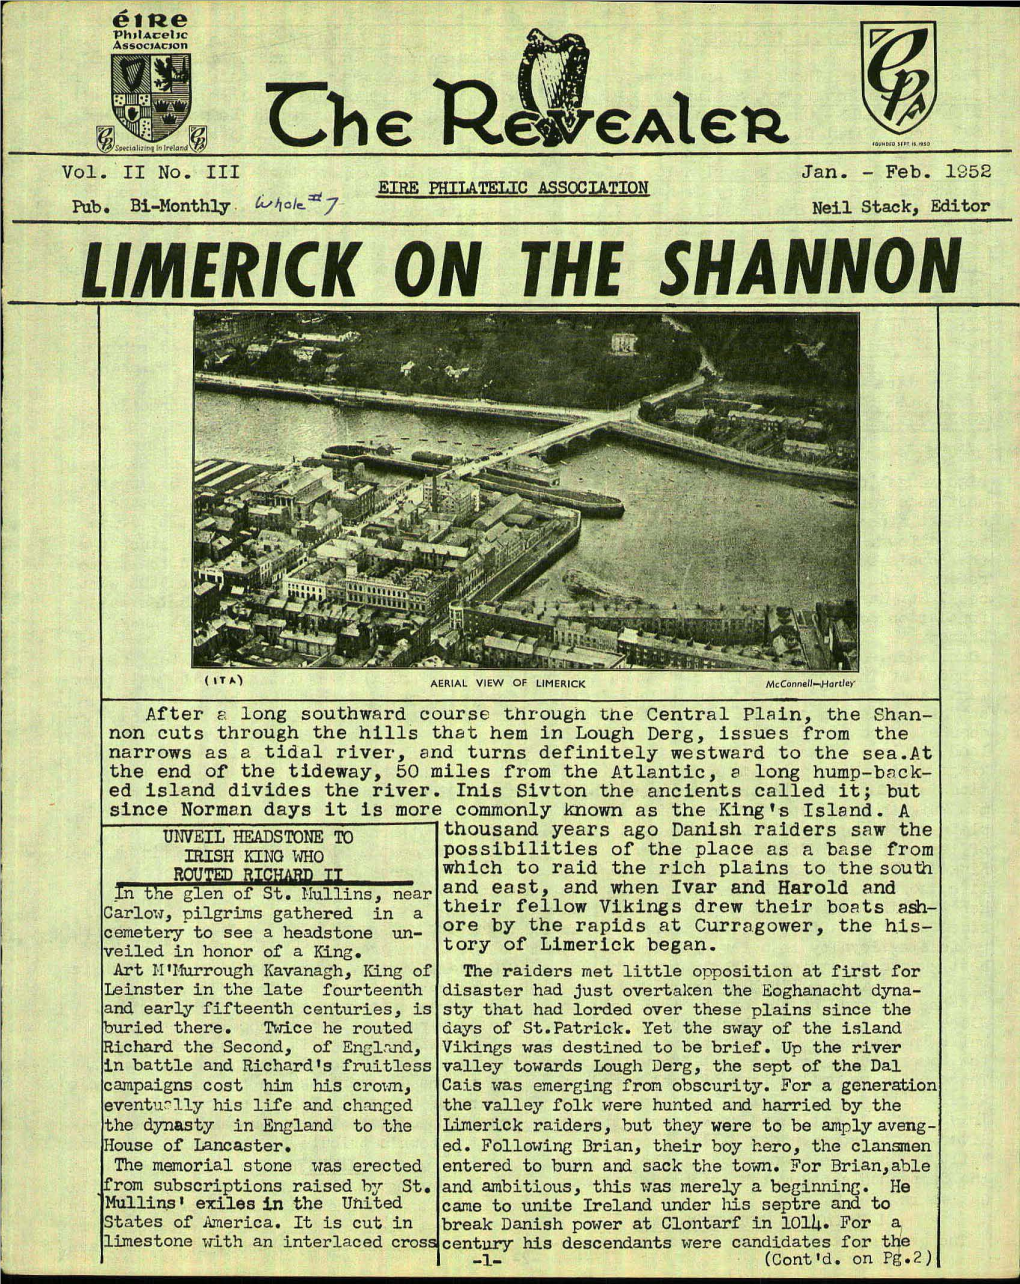 Limerick on the Shannon